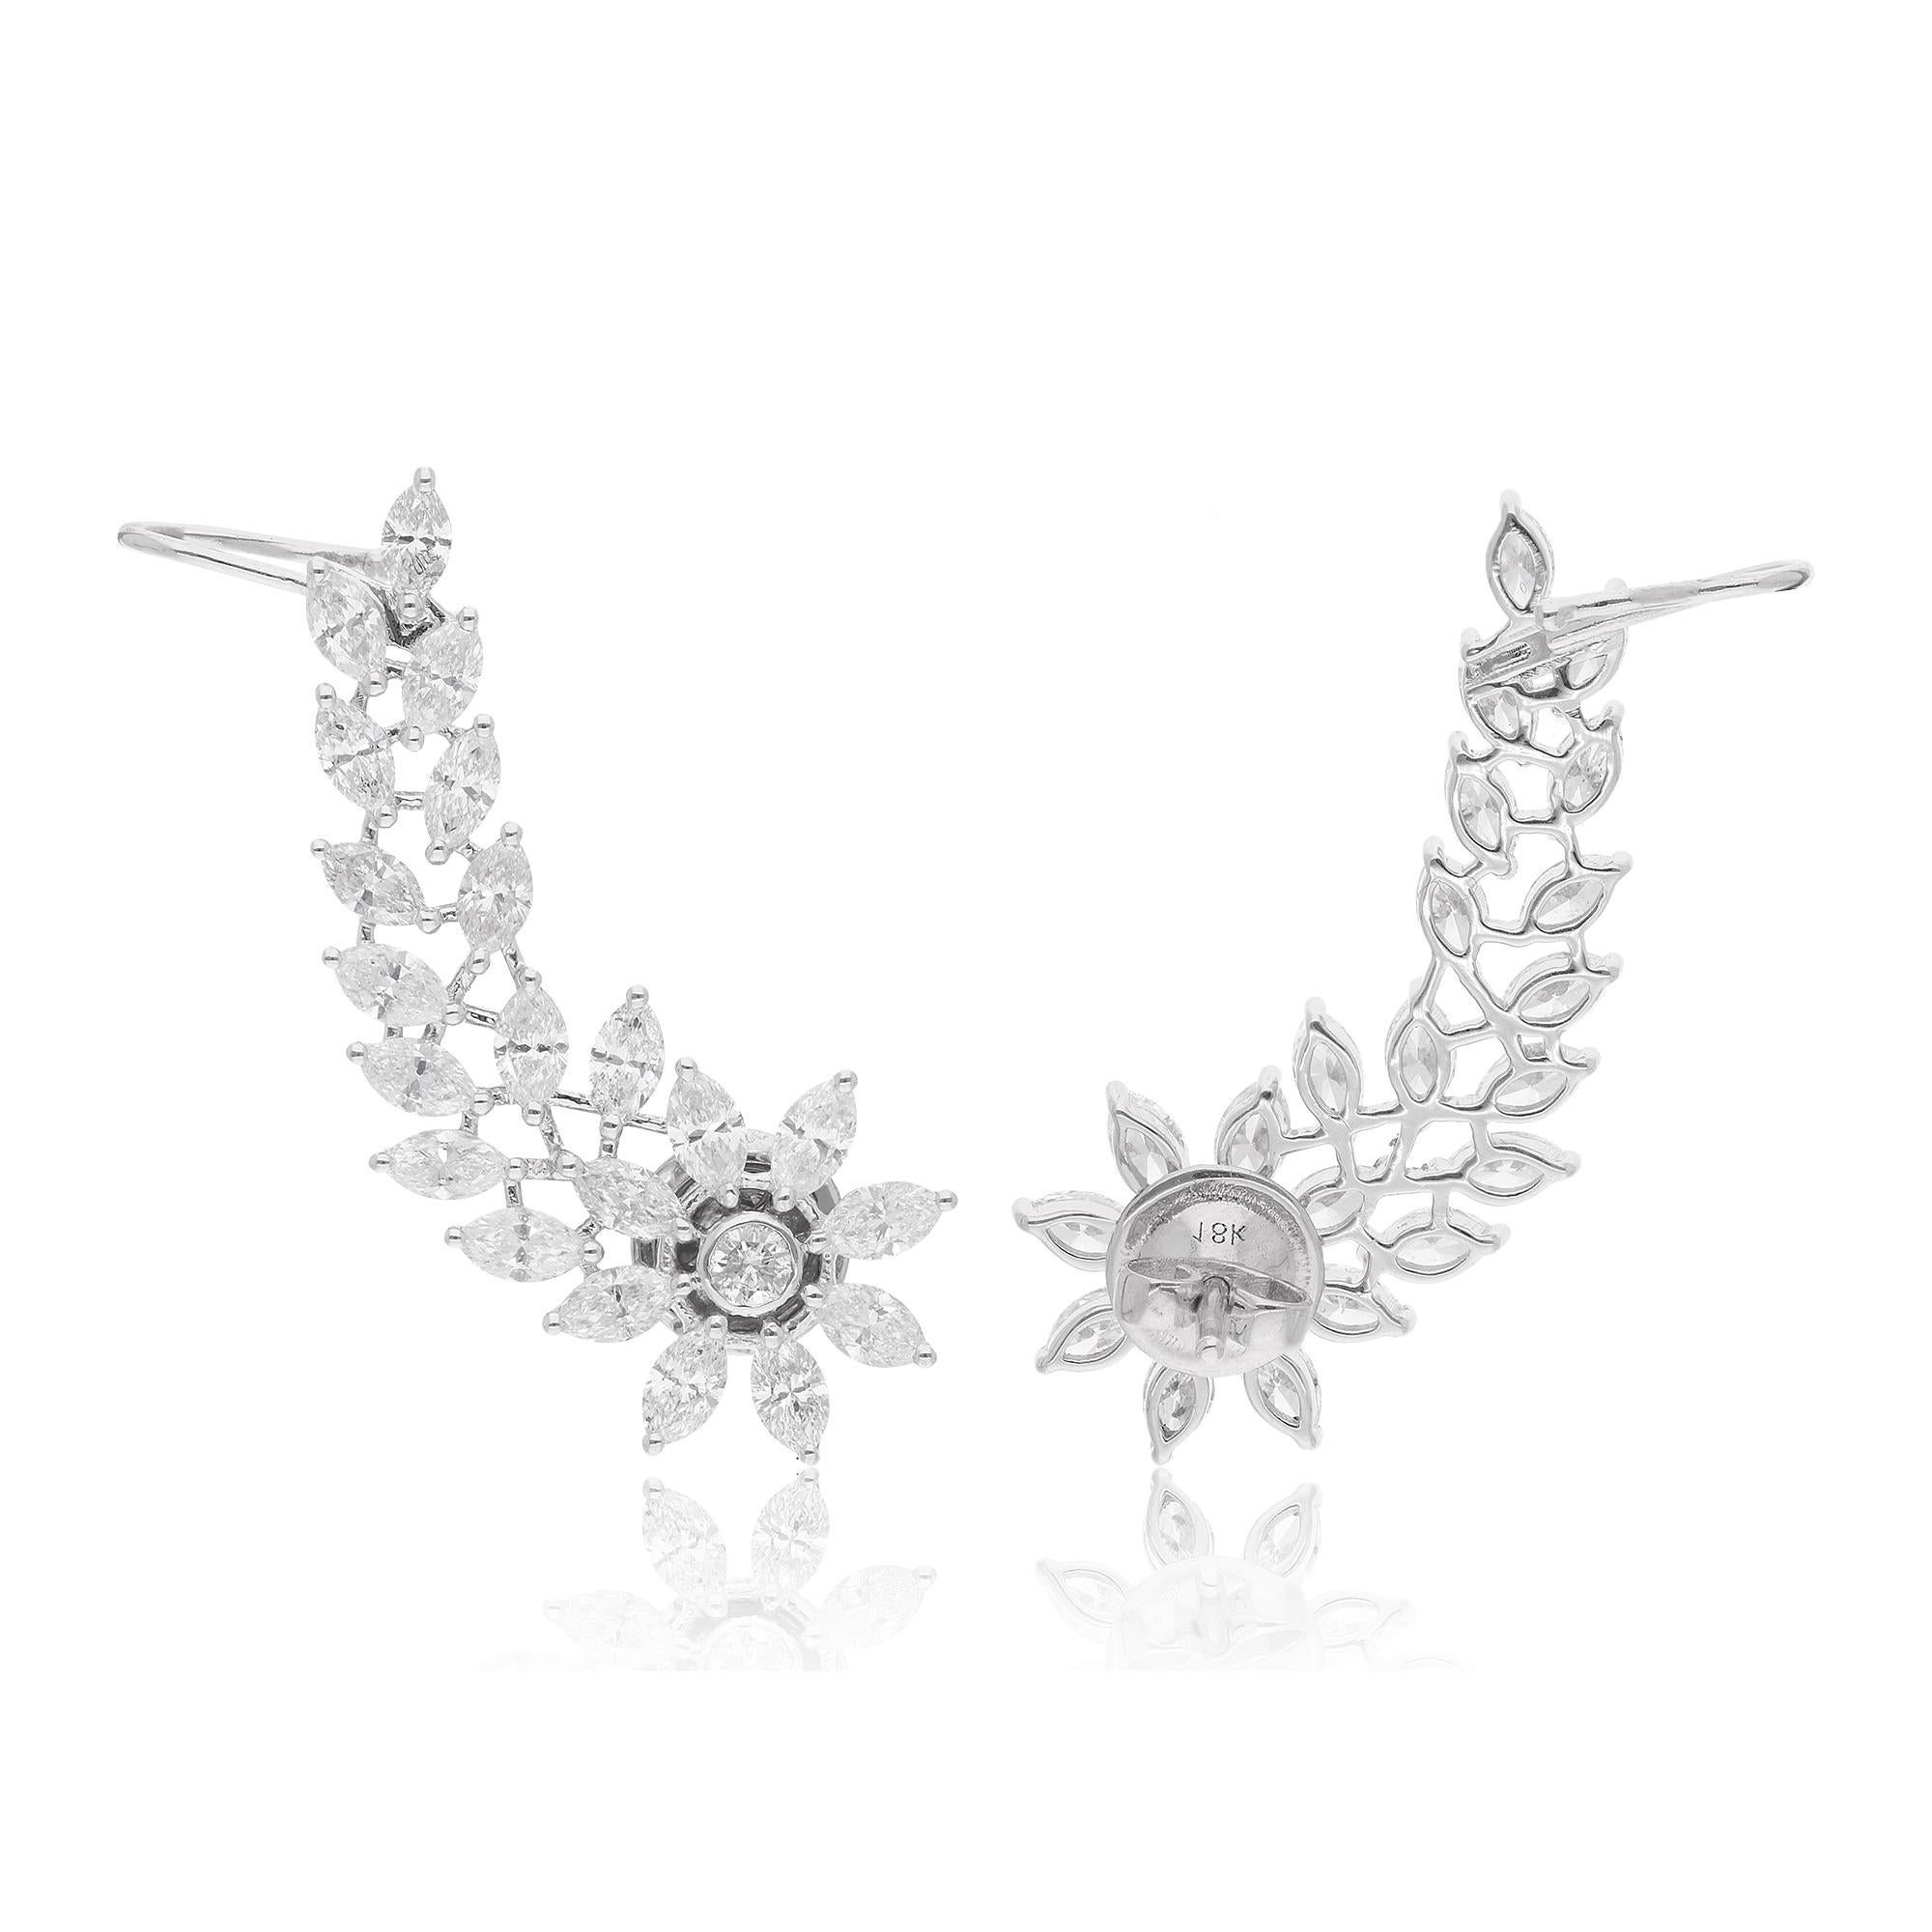 Experience the enchanting beauty of nature with these exquisite Real Marquise & Round Diamond Leaf Shaped Ear Cuff Earrings, meticulously crafted in lustrous 18 Karat White Gold. Each earring is a stunning embodiment of organic elegance and timeless